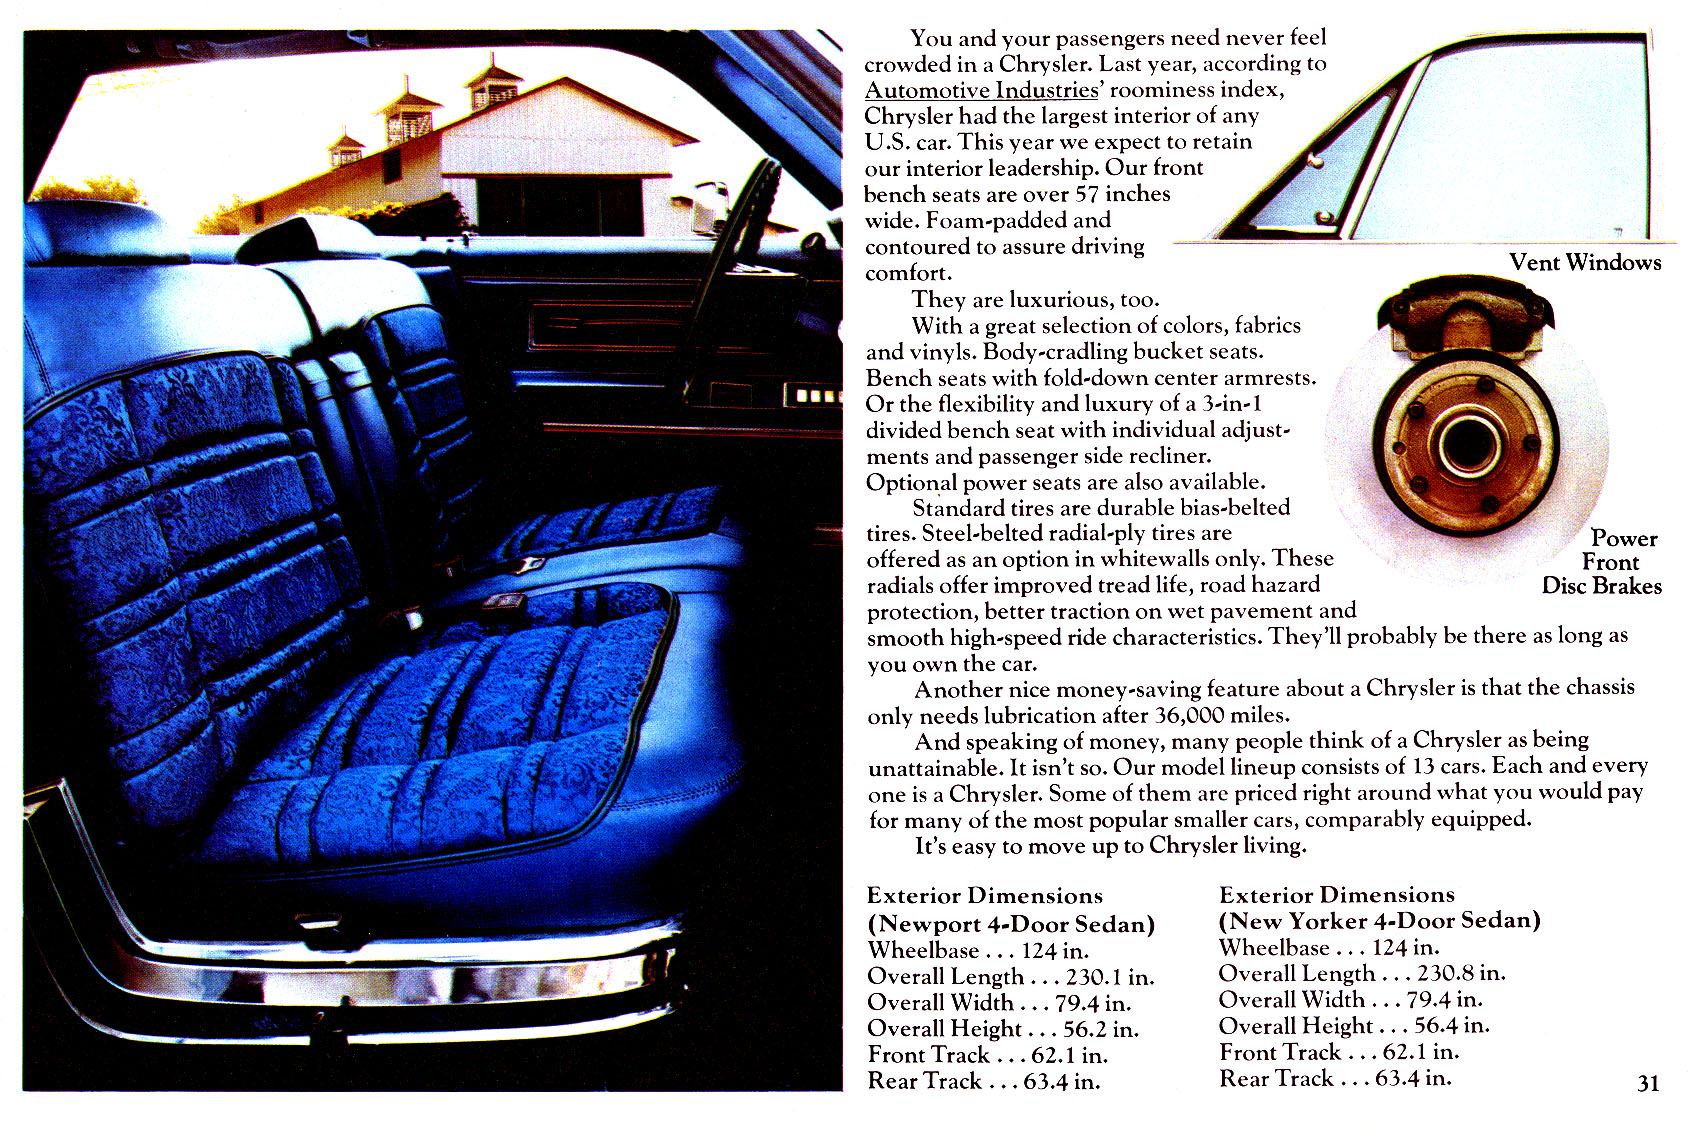 1973 Chrysler Plymouth Brochure Page 4